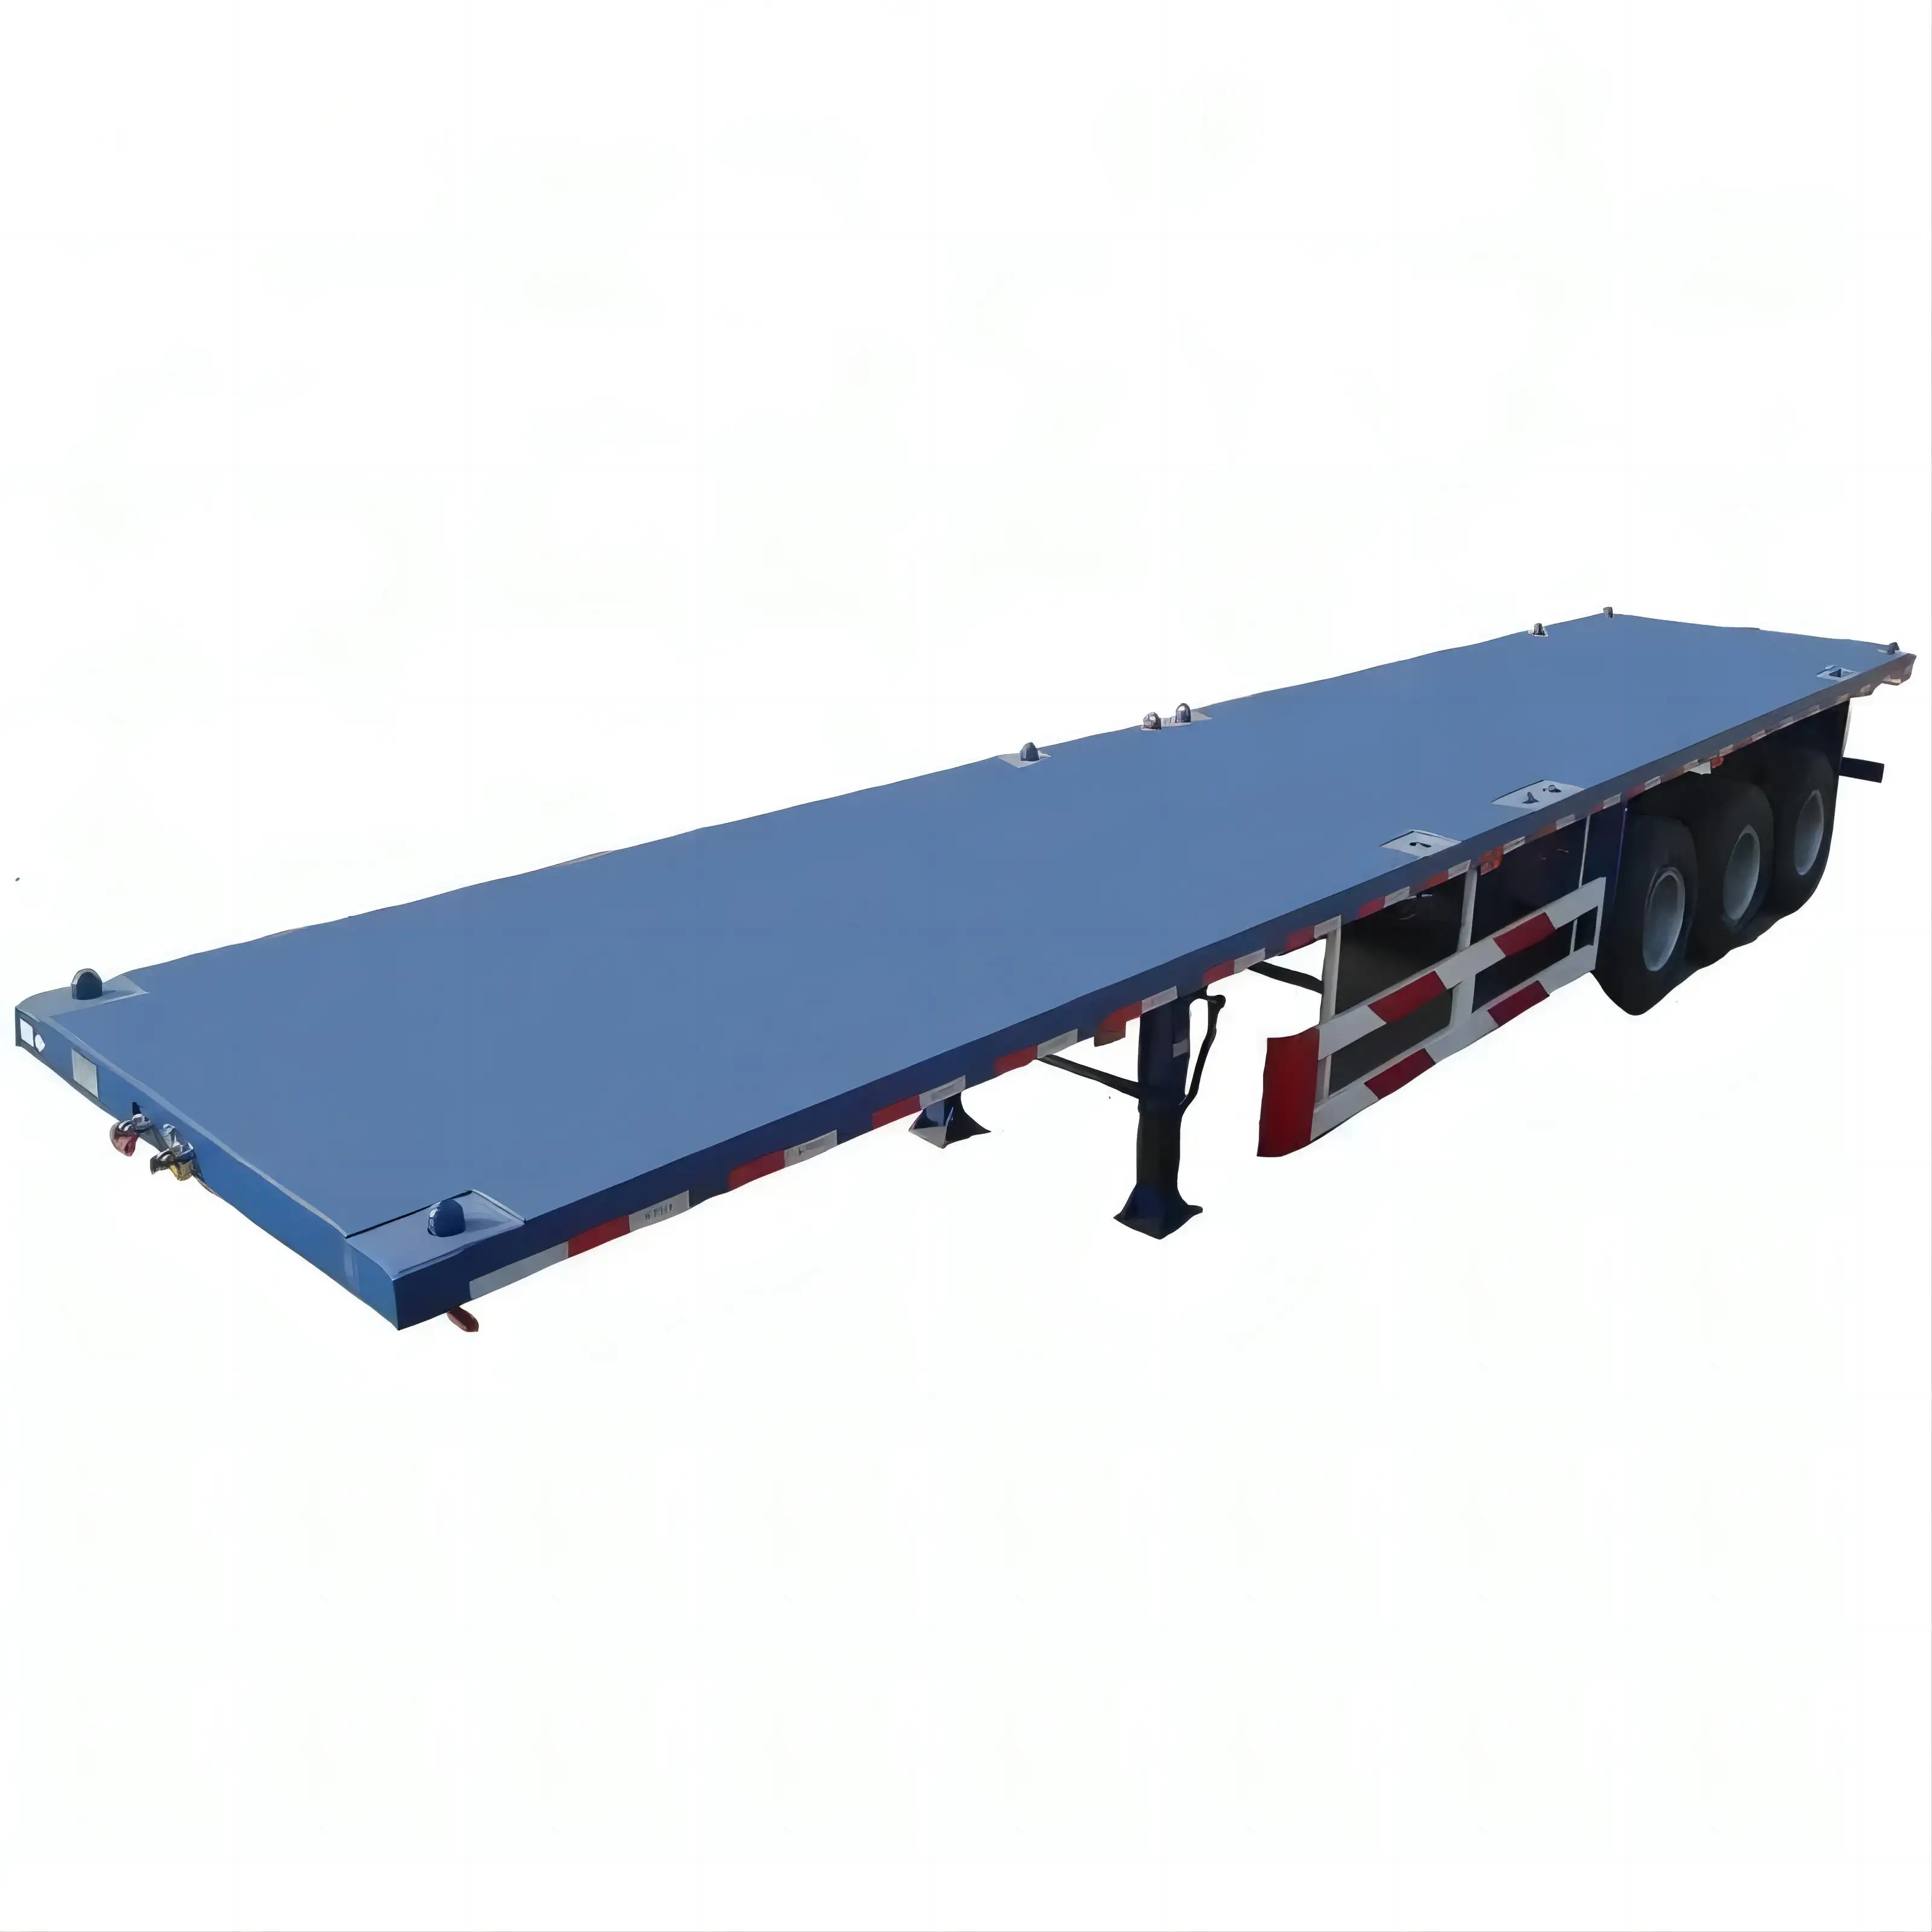 Made In China High Standard Eco-Friendly Platform Tri-Axle Flatbed Semi-Trailer For Sale